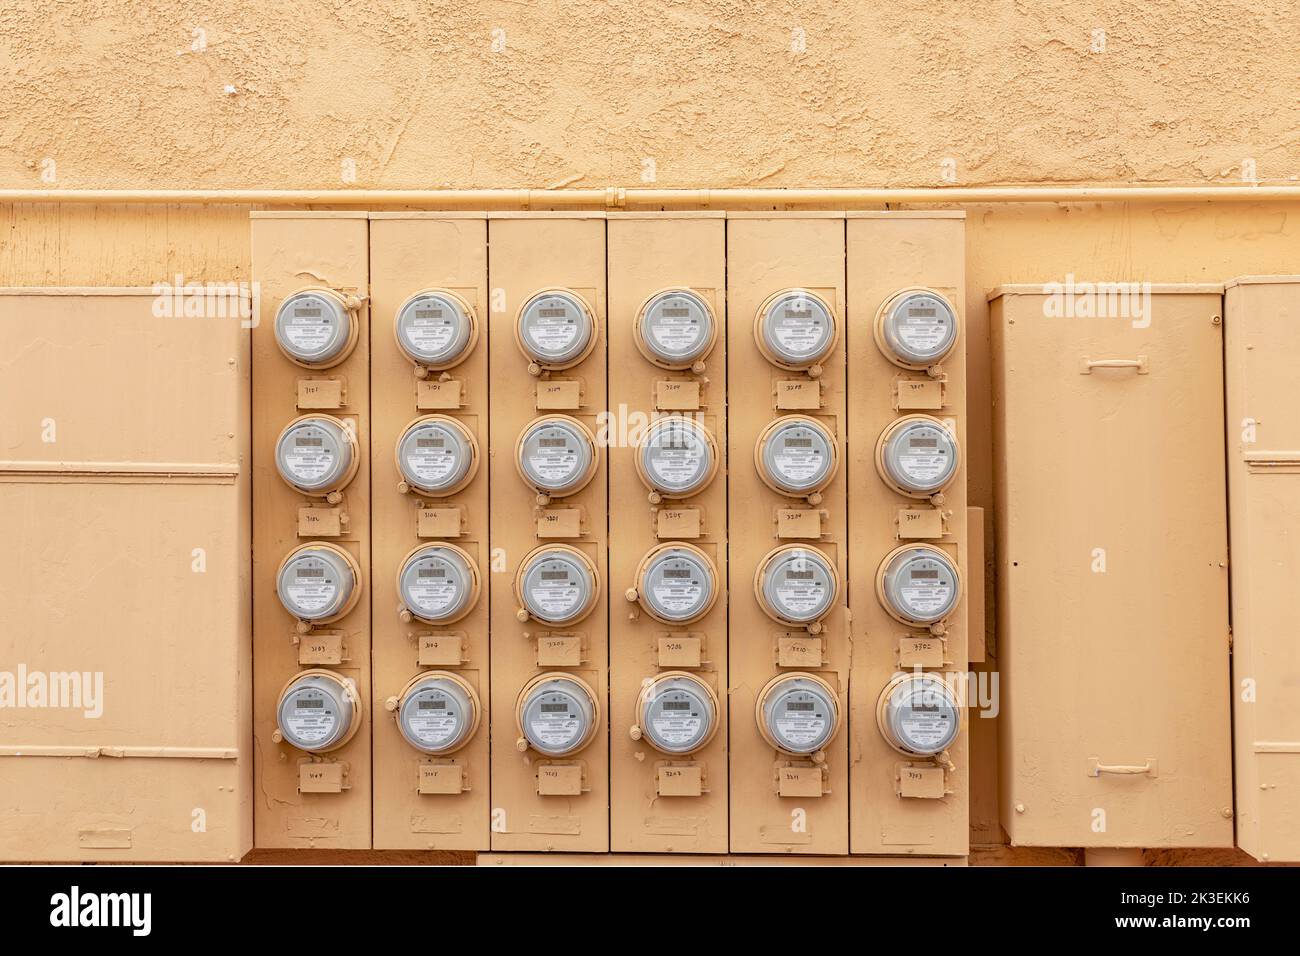 Las Vegas, USA - March 10, 2019: electricity meters of an appartment building in Las Vegas Stock Photo